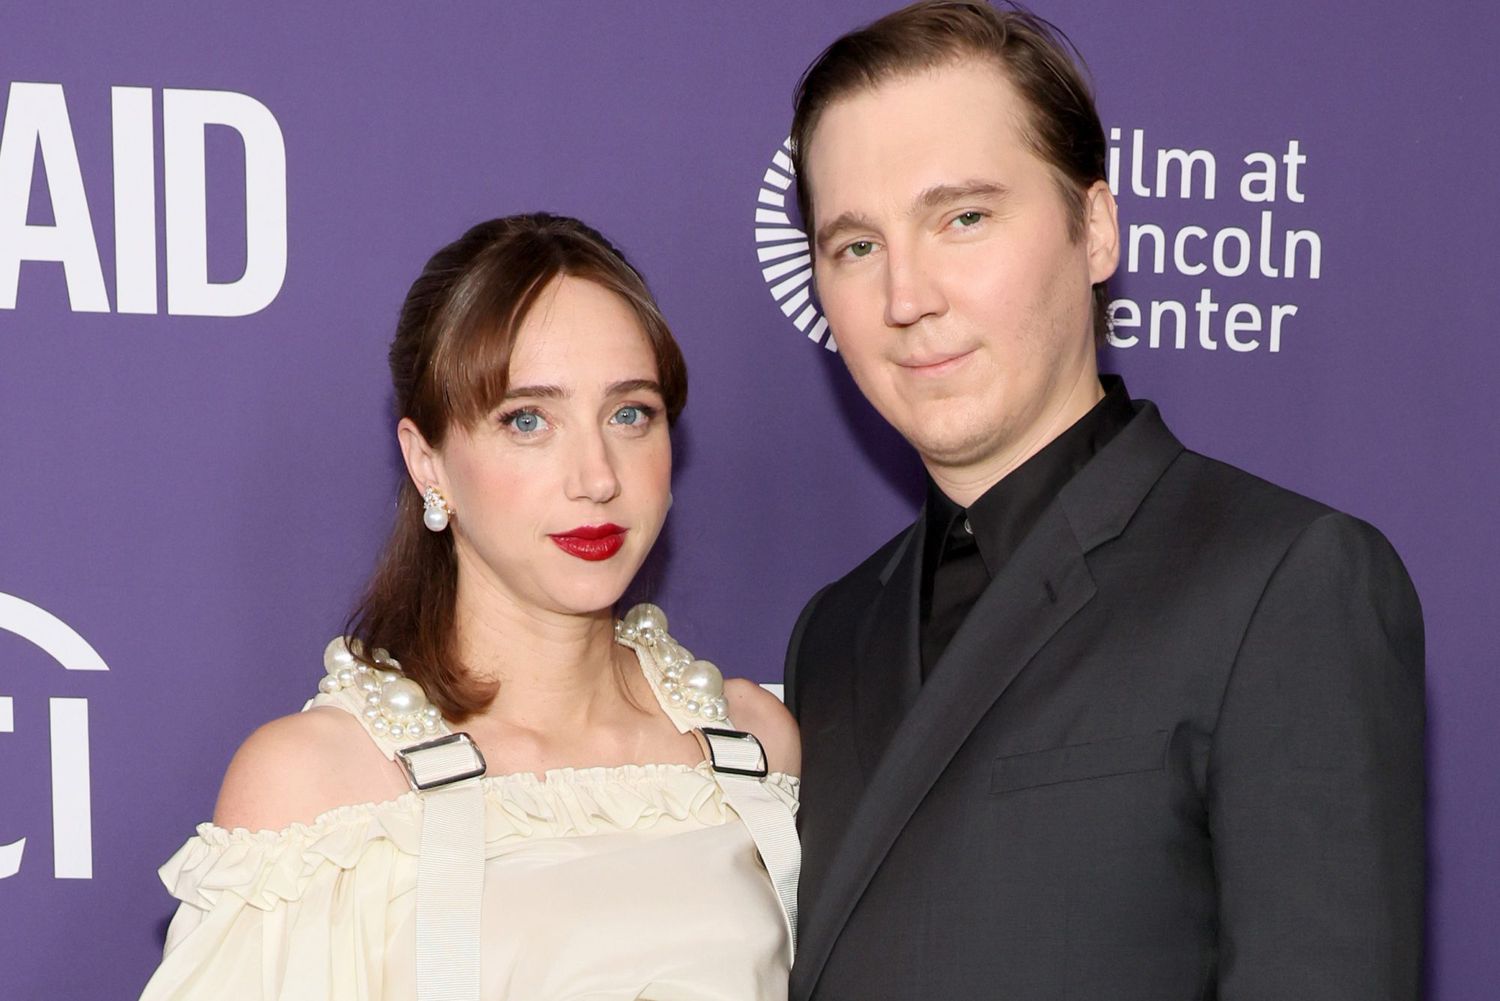 NEW YORK, NEW YORK - OCTOBER 13: Zoe Kazan and Paul Dano attend the red carpet event for "She Said" during the 60th New York Film Festival at Alice Tully Hall, Lincoln Center on October 13, 2022 in New York City. (Photo by Dia Dipasupil/Getty Images for FLC)